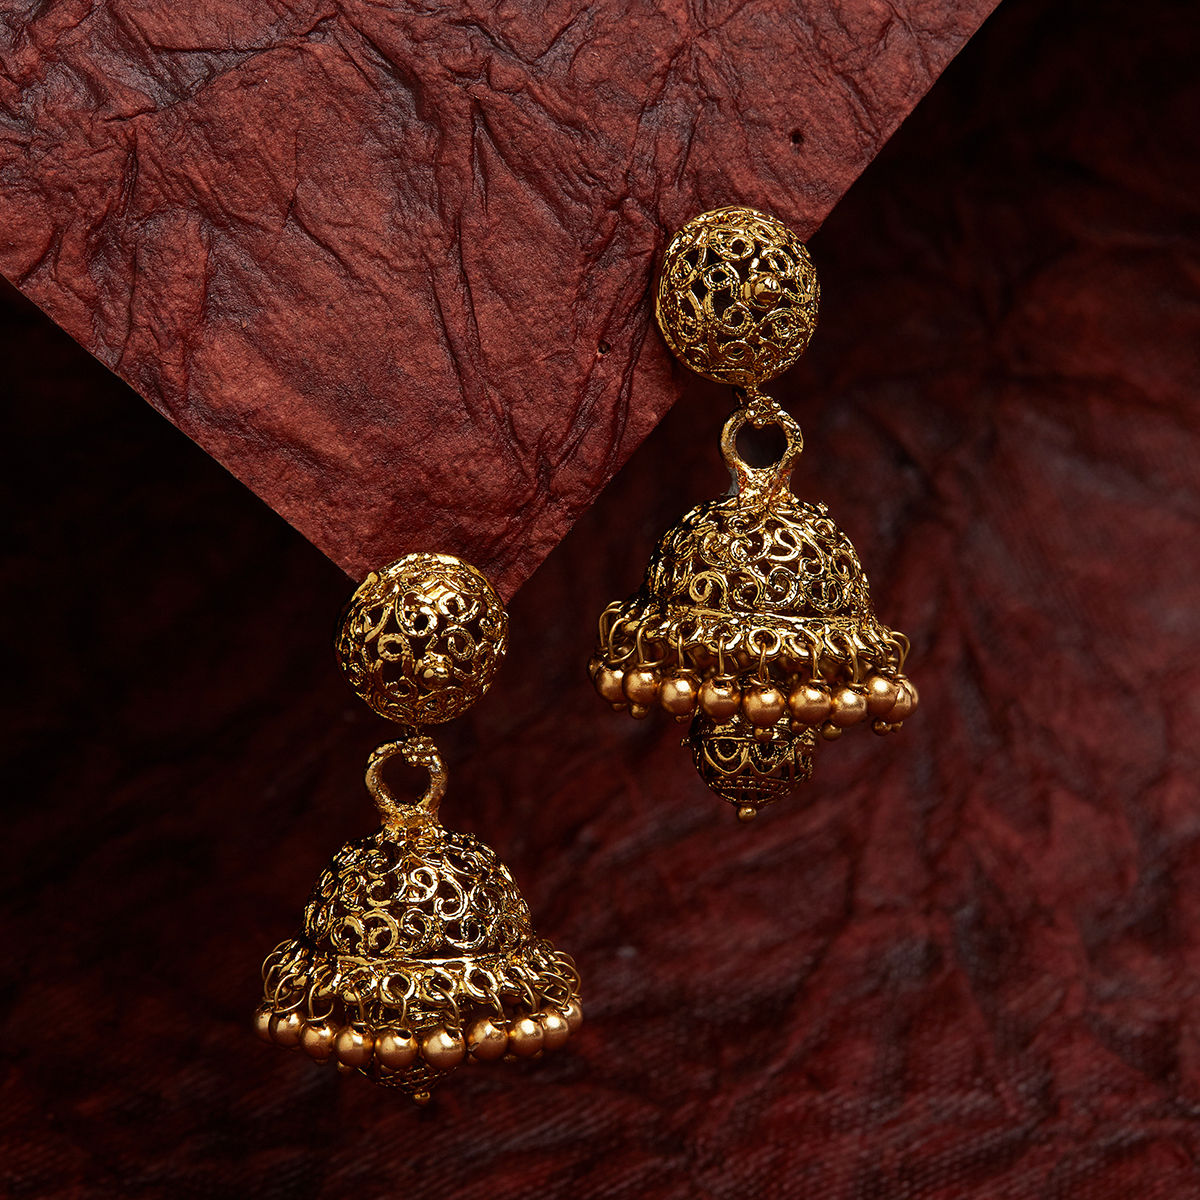 Pretty ornate South Indian Traditional Silver Temple Ruby Green Jhumka  Earrings  Gold earrings designs Wedding jewellery designs Gold jewellery  design necklaces